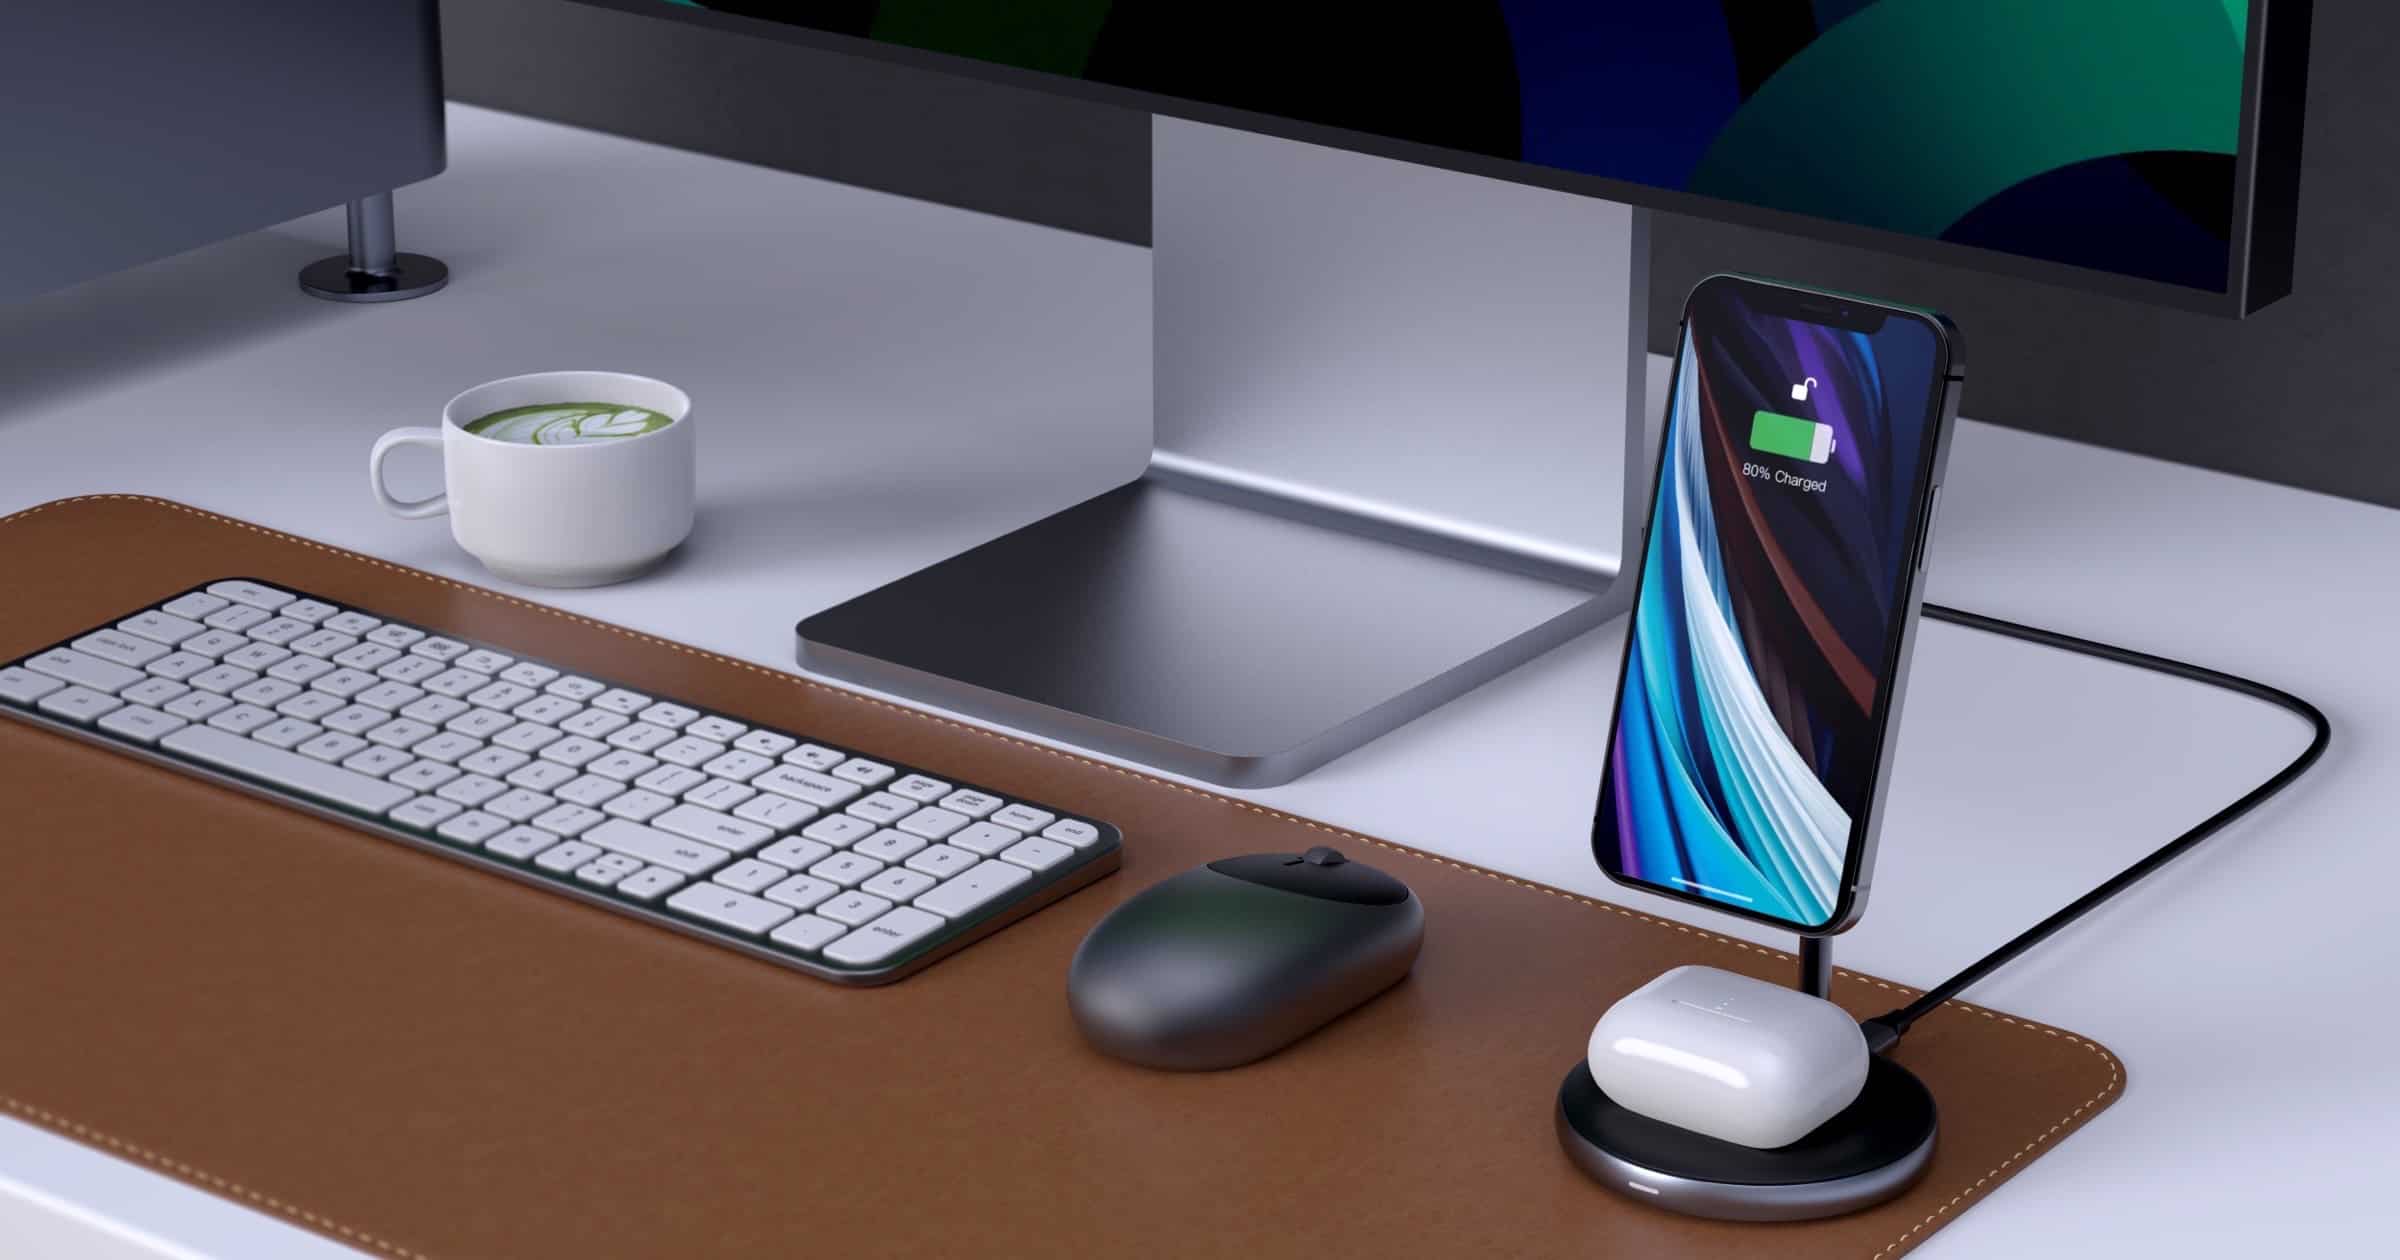 HyperJuice is a New Magnetic Wireless Charging Stand for iPhone 12, AirPods